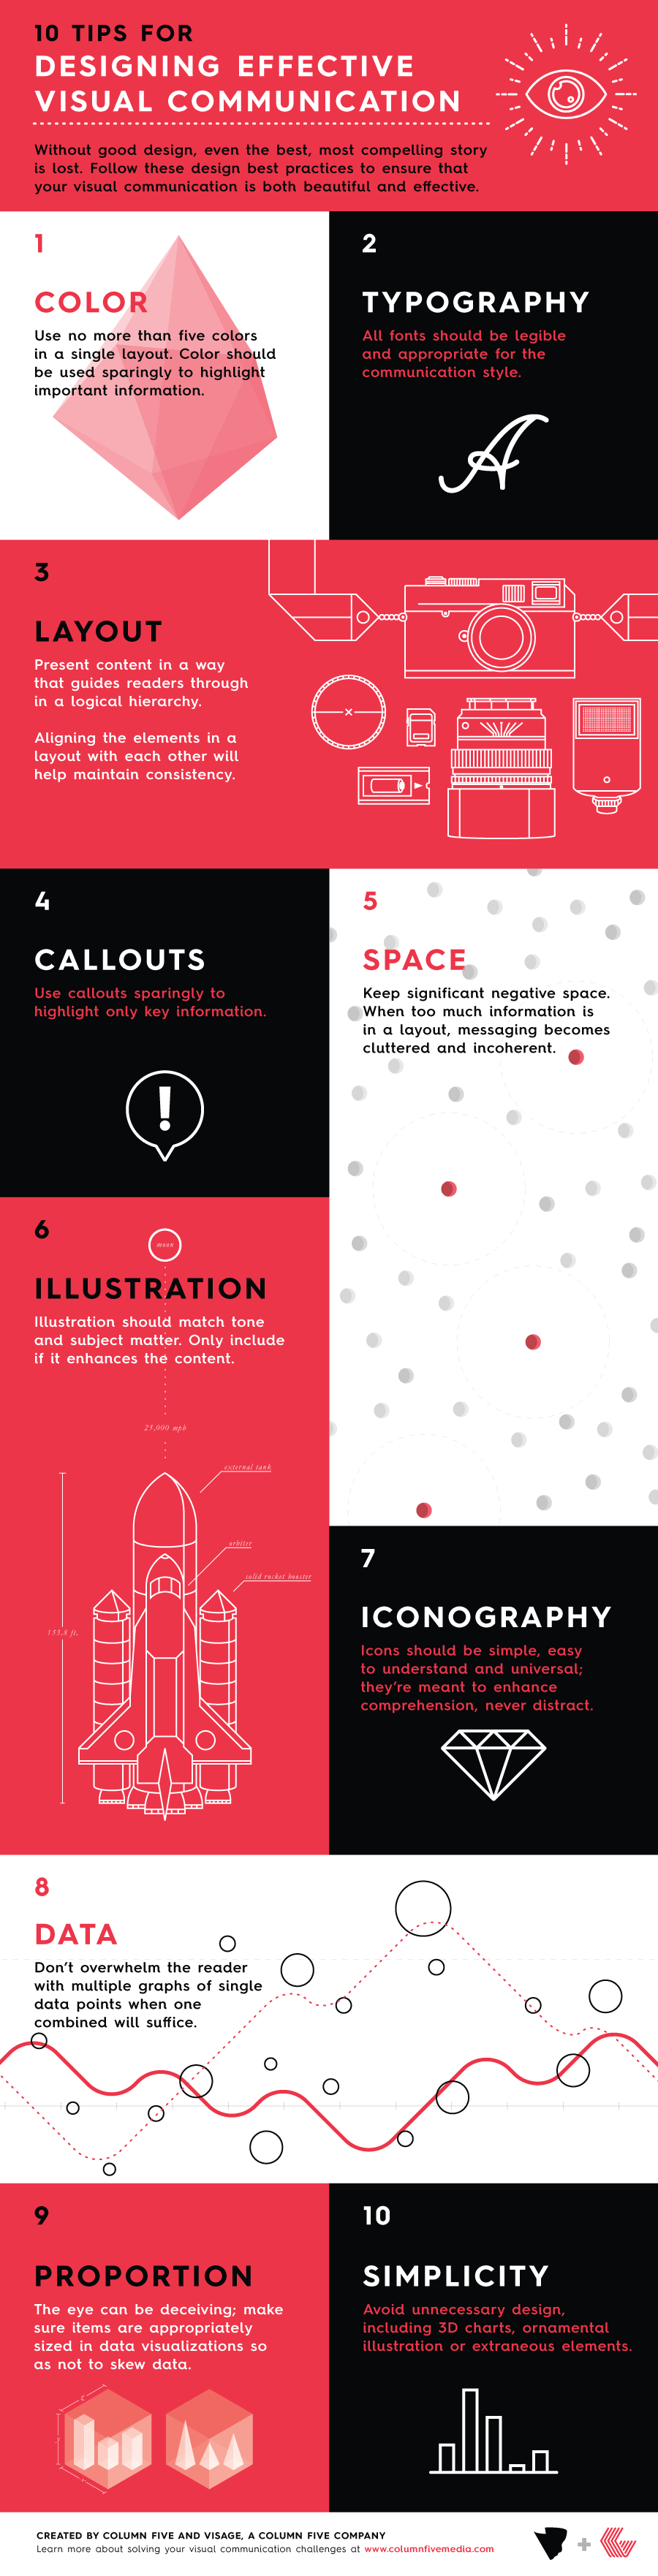 visual-content-visual-communication-infographic-design-tips